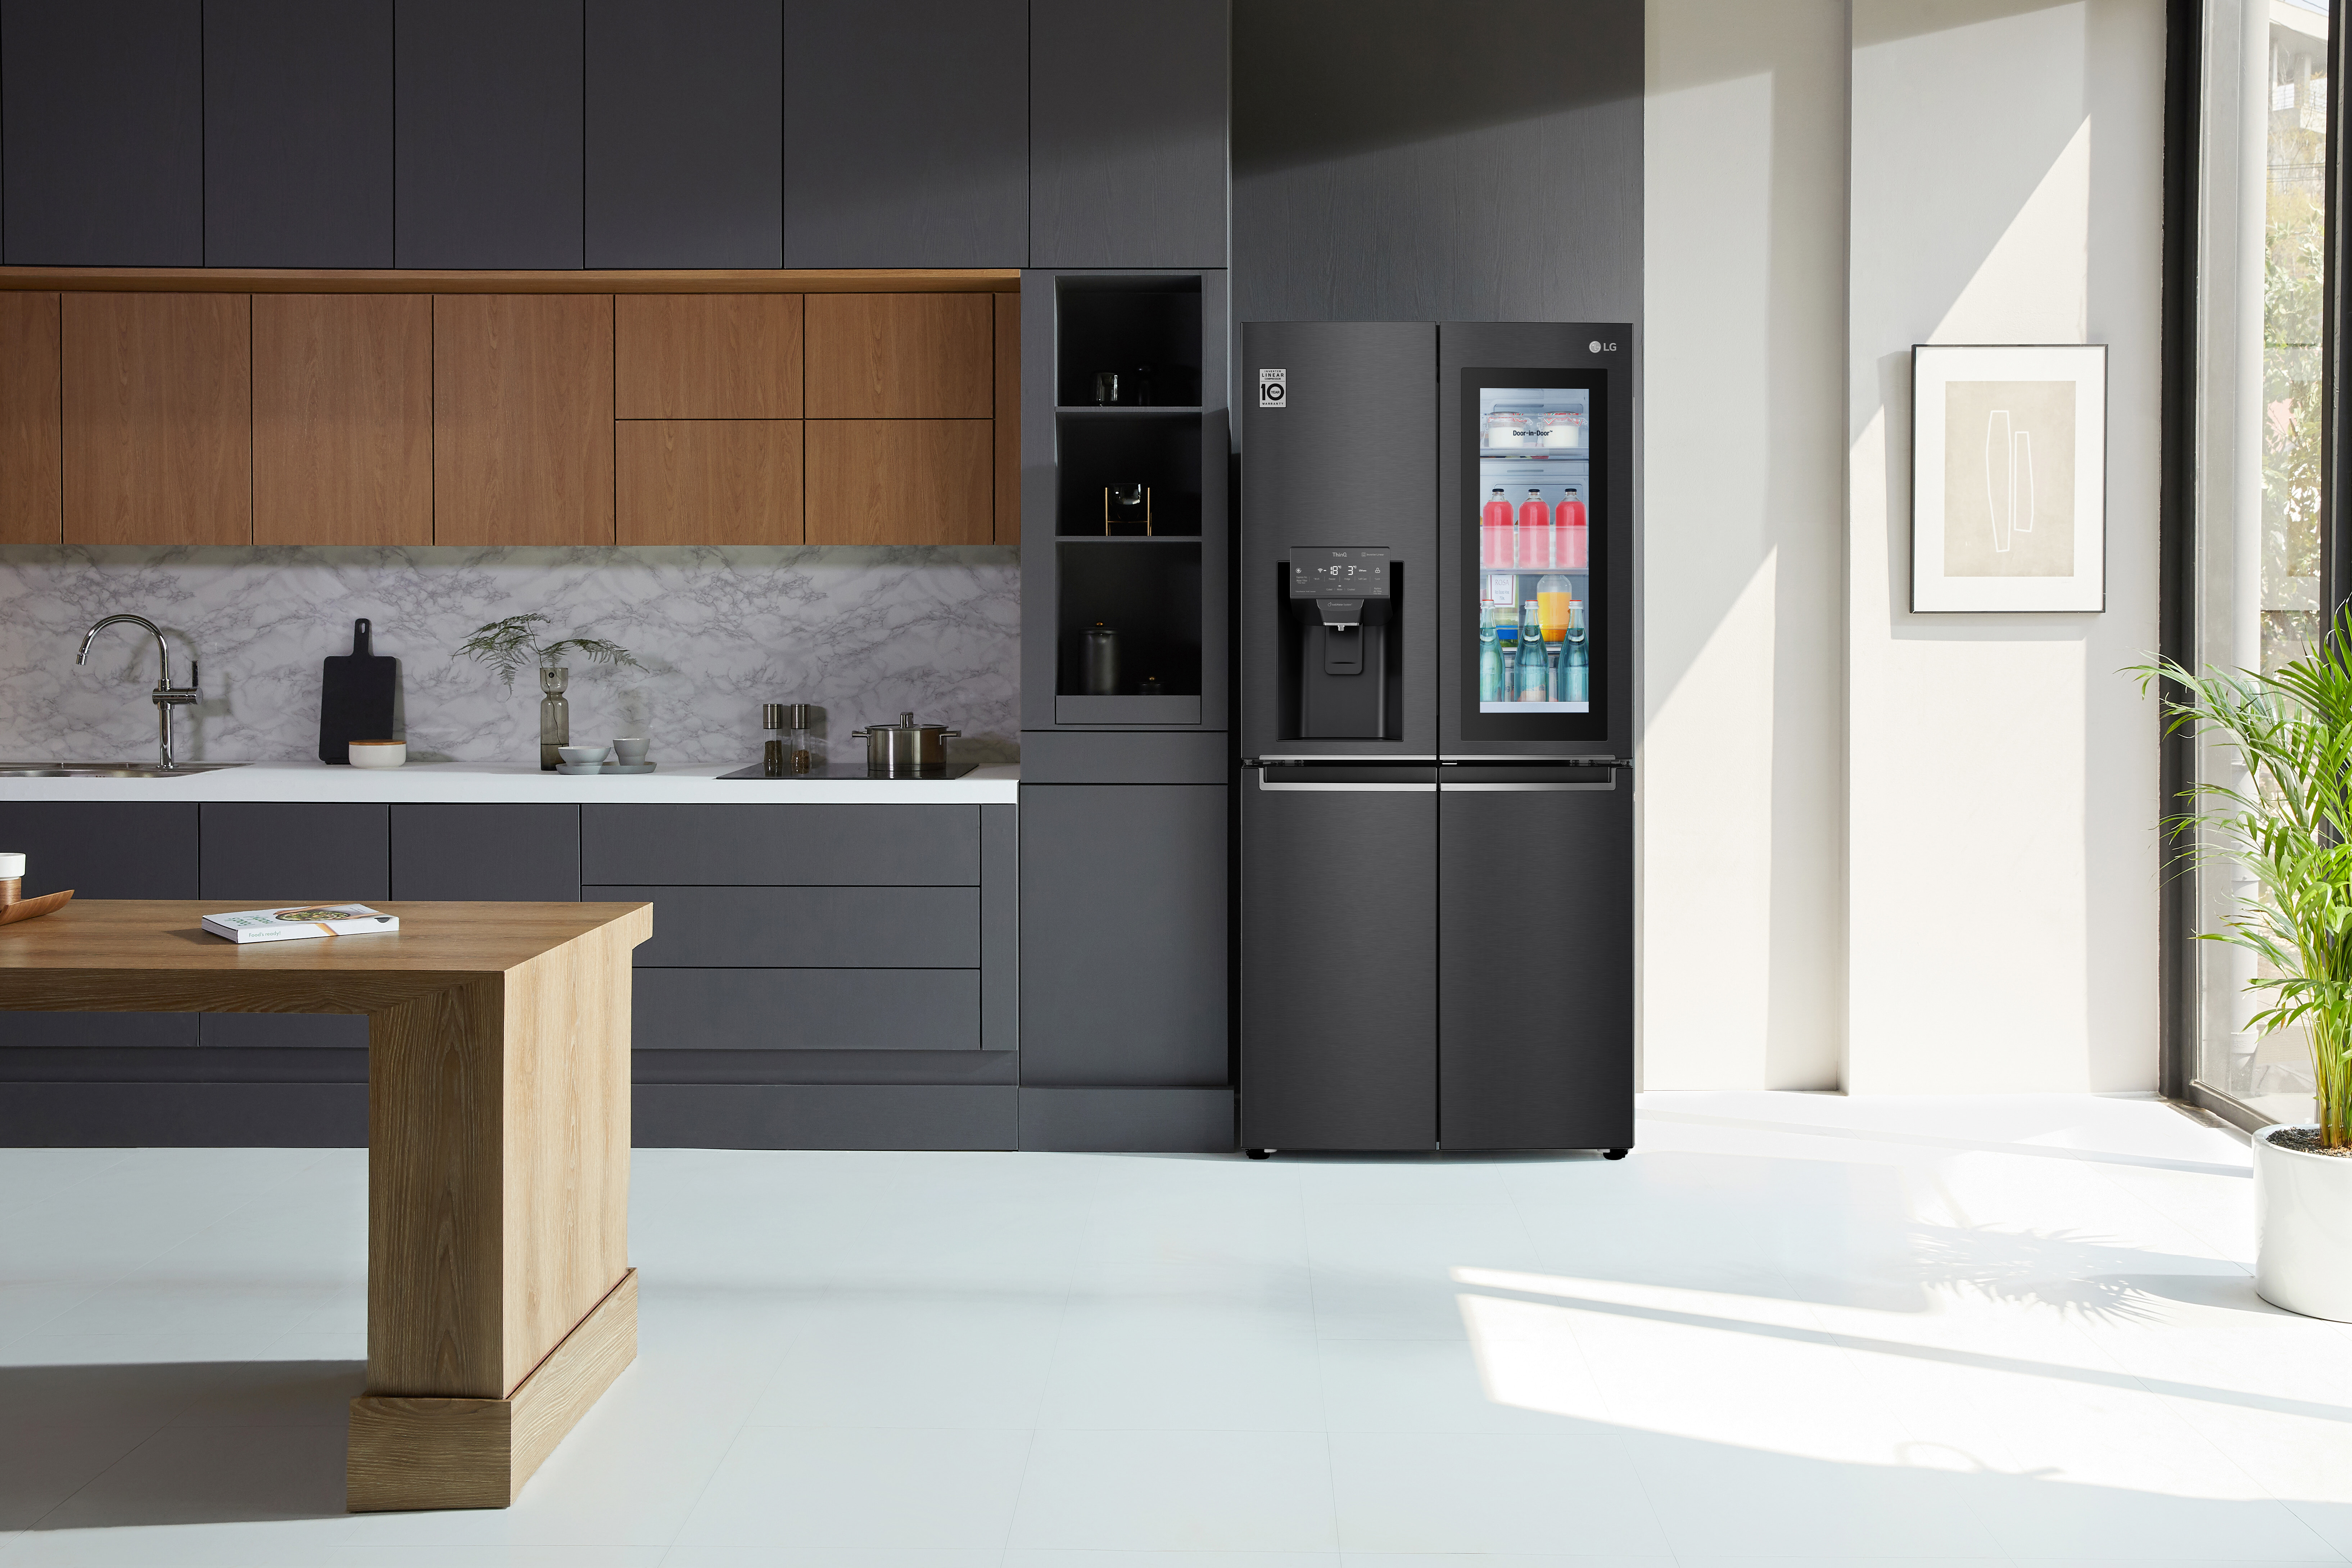 A black LG InstaView Fridge in a matching black kitchen with warm timber accents.